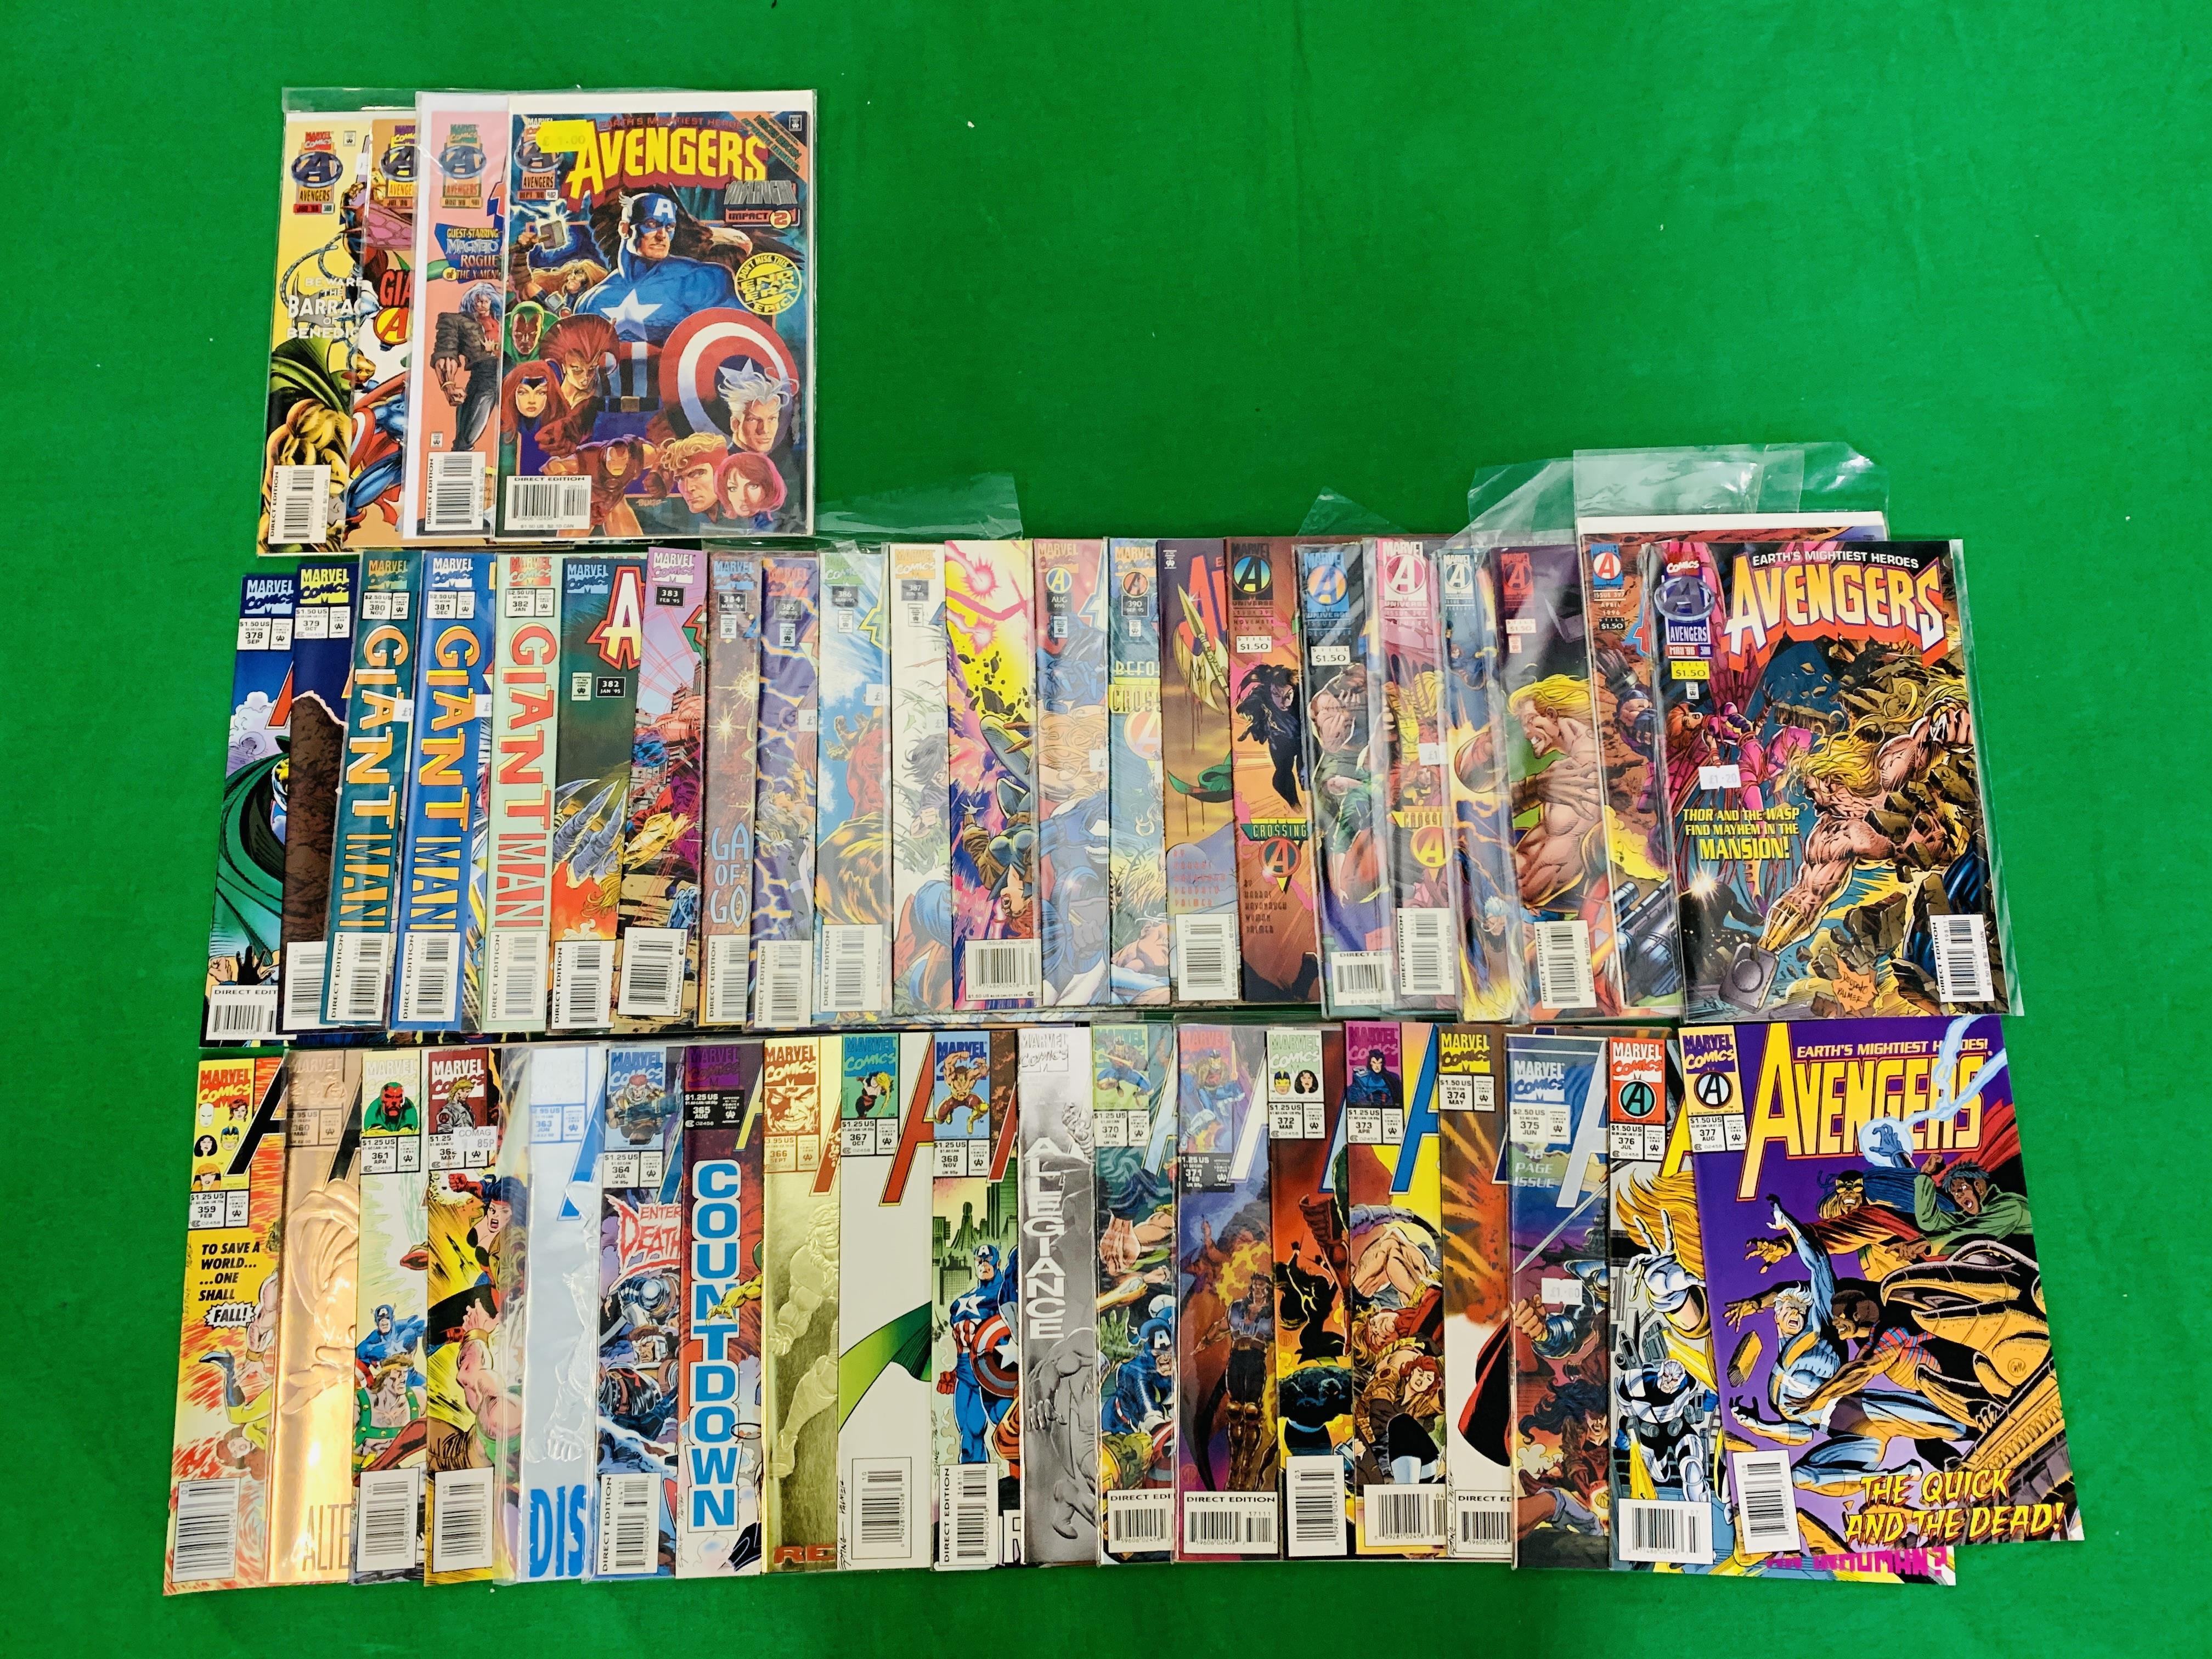 MARVEL COMICS THE AVENGERS NO. 300 - 402, MISSING ISSUES 325, 329 AND 334. - Image 10 of 16